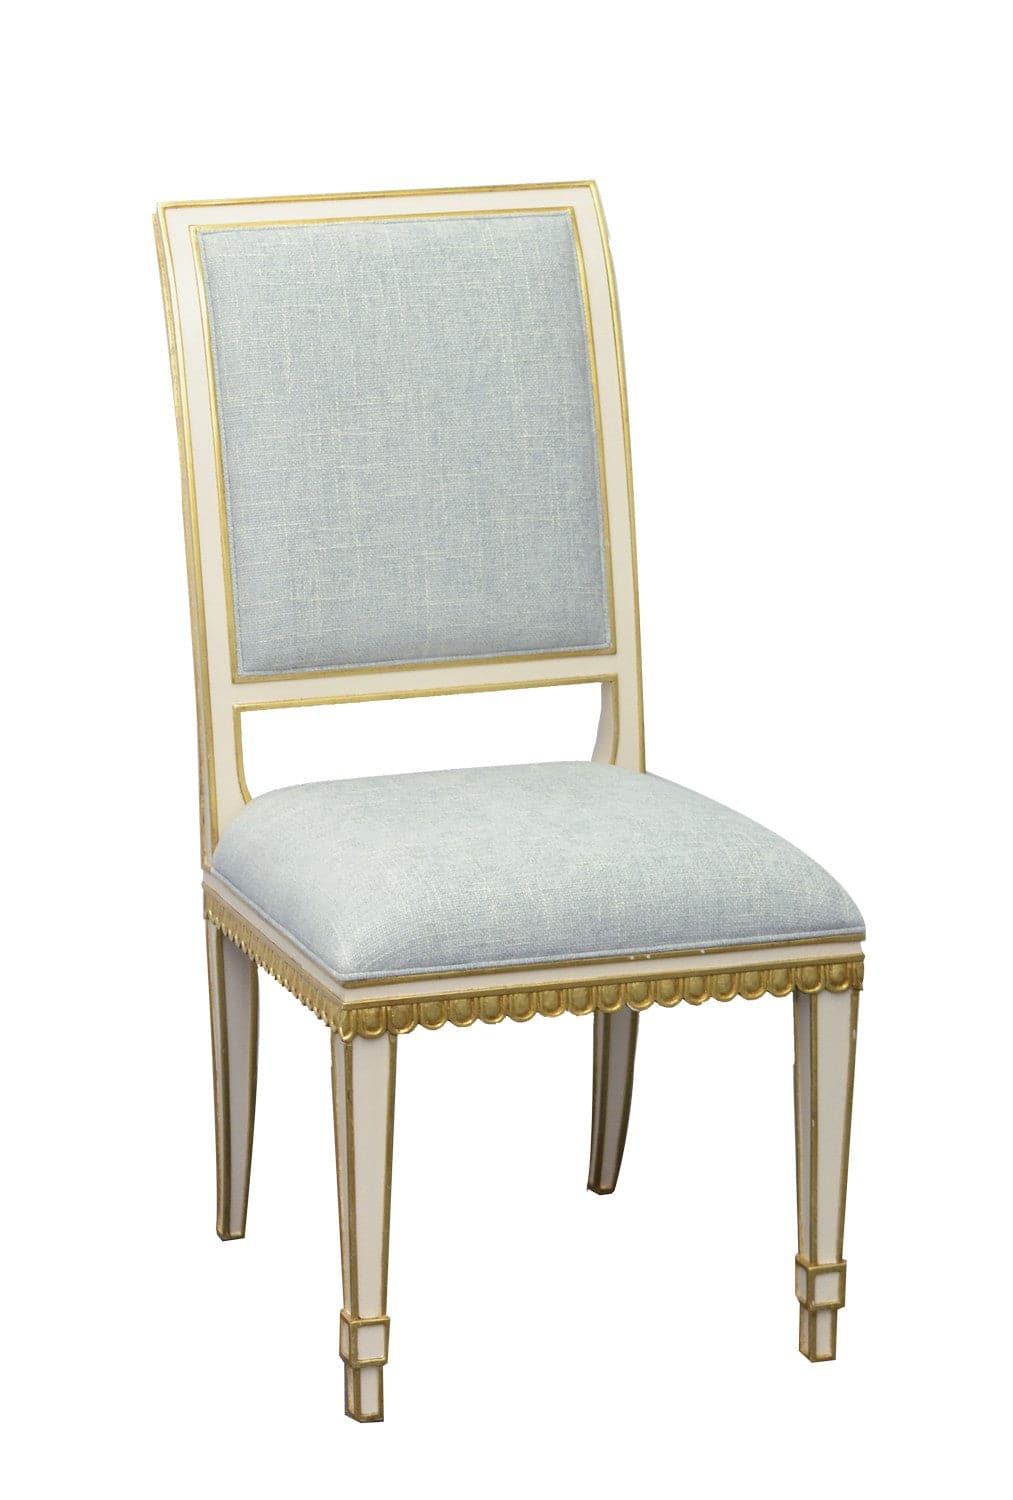 Currey and Company - 7000-0153 - Chair - Ivory/Antique Gold